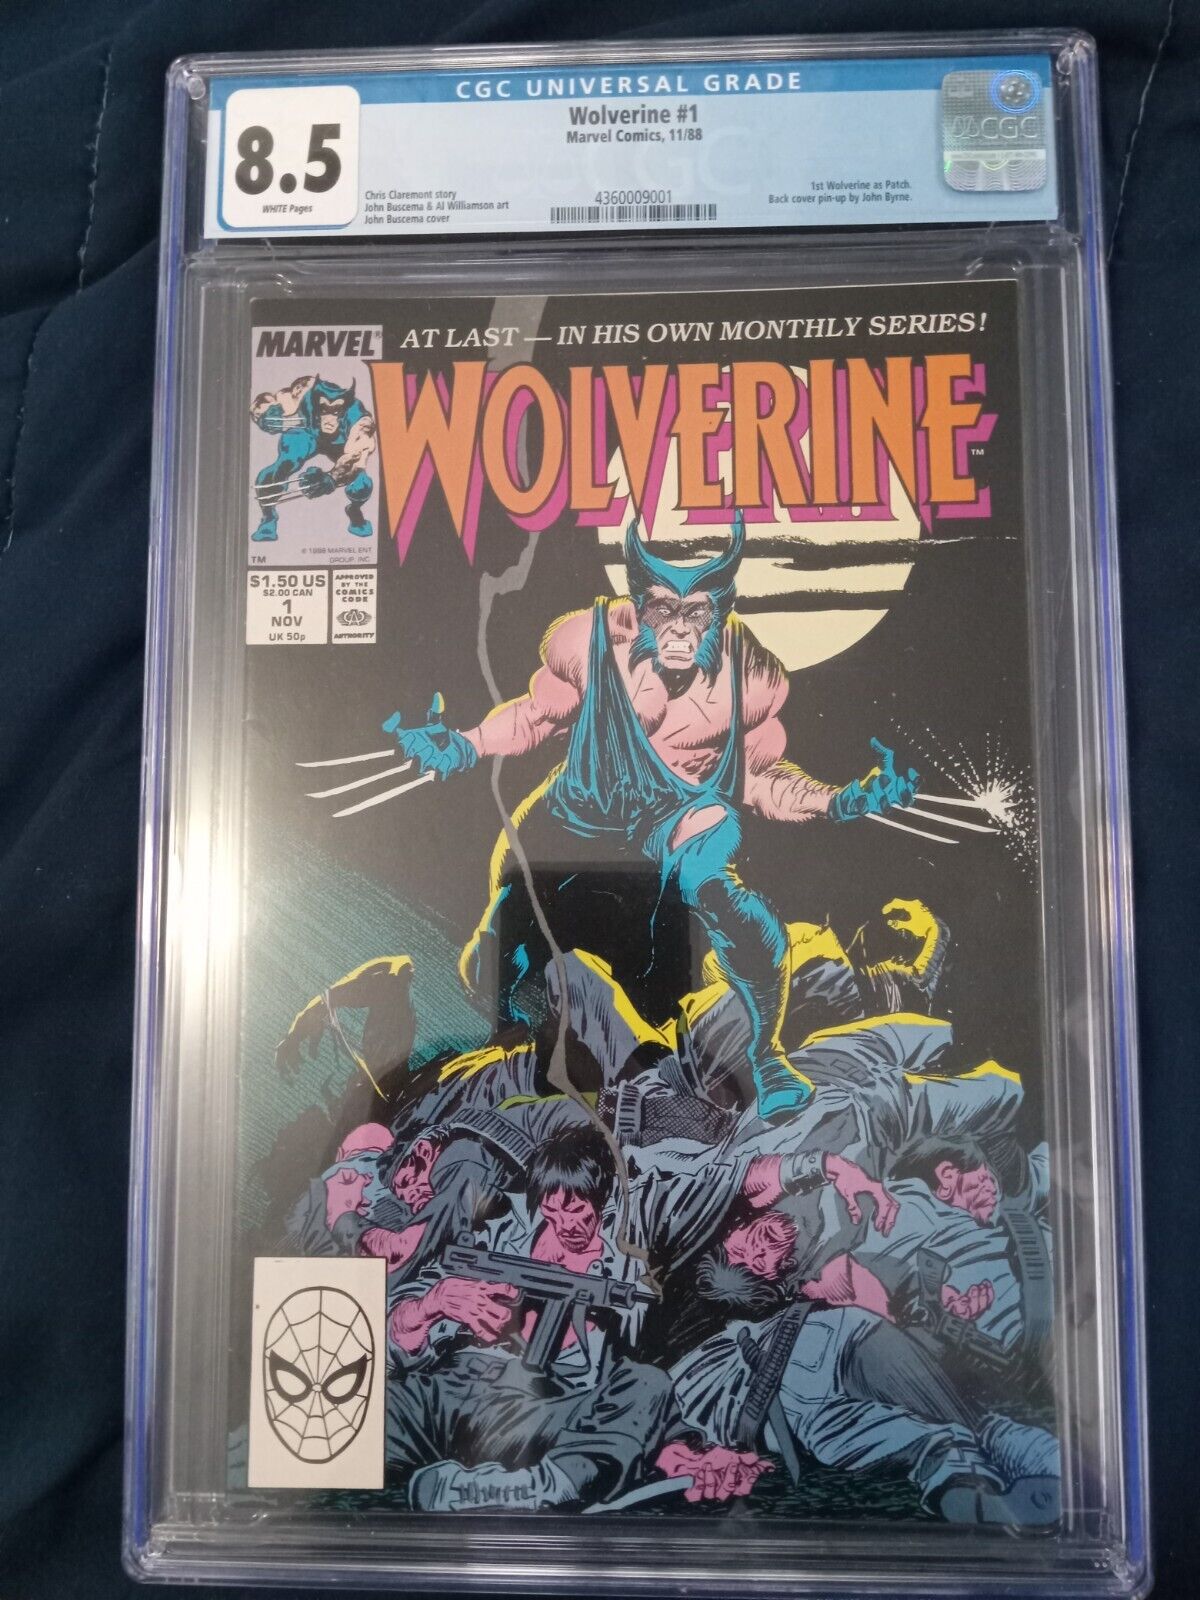 WOLVERINE #1 Comic 1988  CGC 8.5 1st app patch (Free Fast 2 day Shipping)